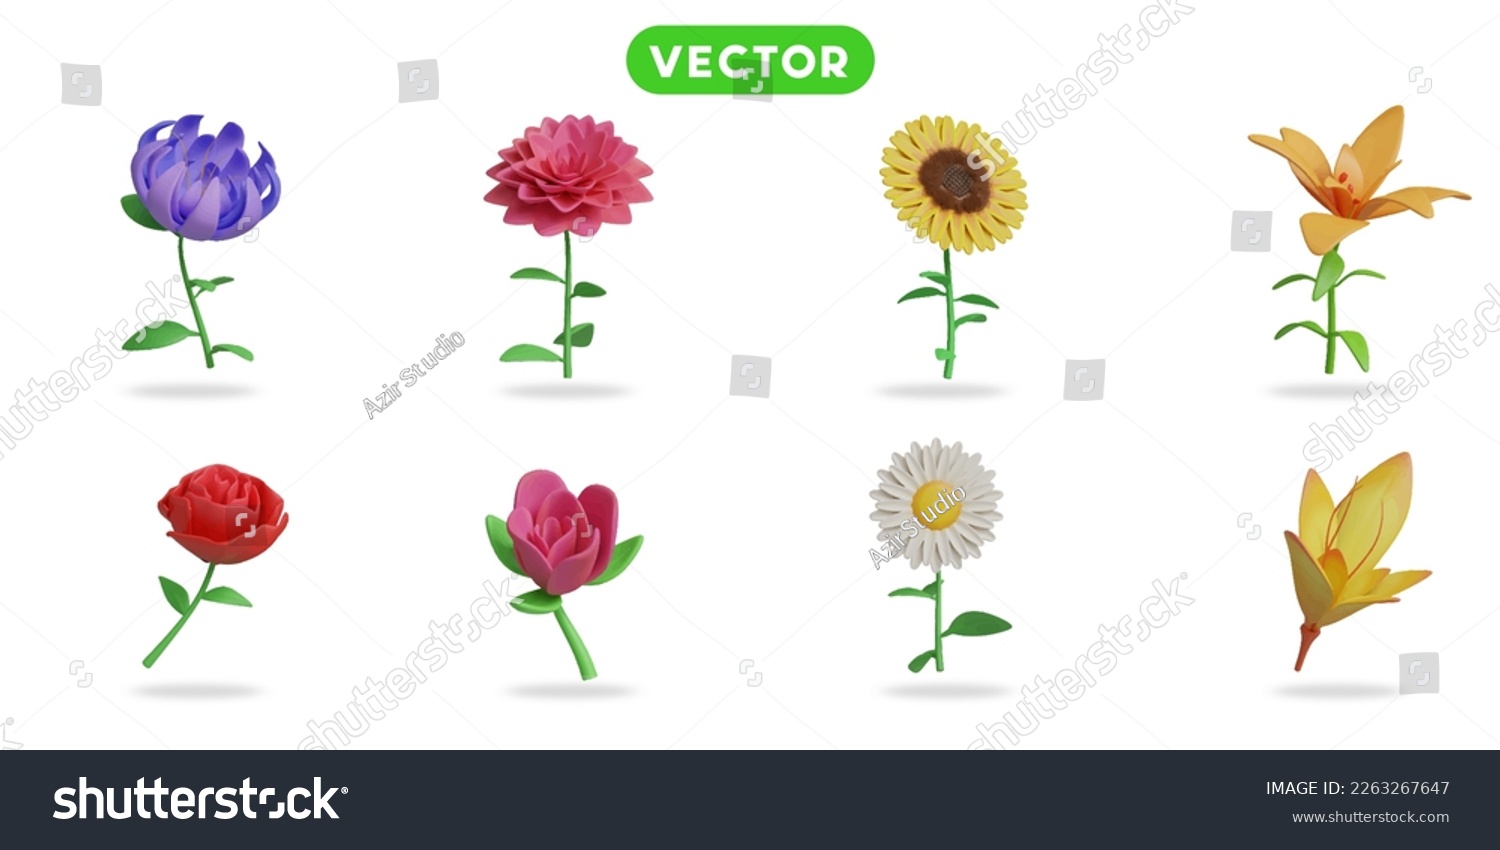 SVG of 3d rendering. Flowers in spring and summer icons set on a white background Cremon flower, dahlia flower, sunflower, tiger lily, rose, tulip, daisy, lily svg